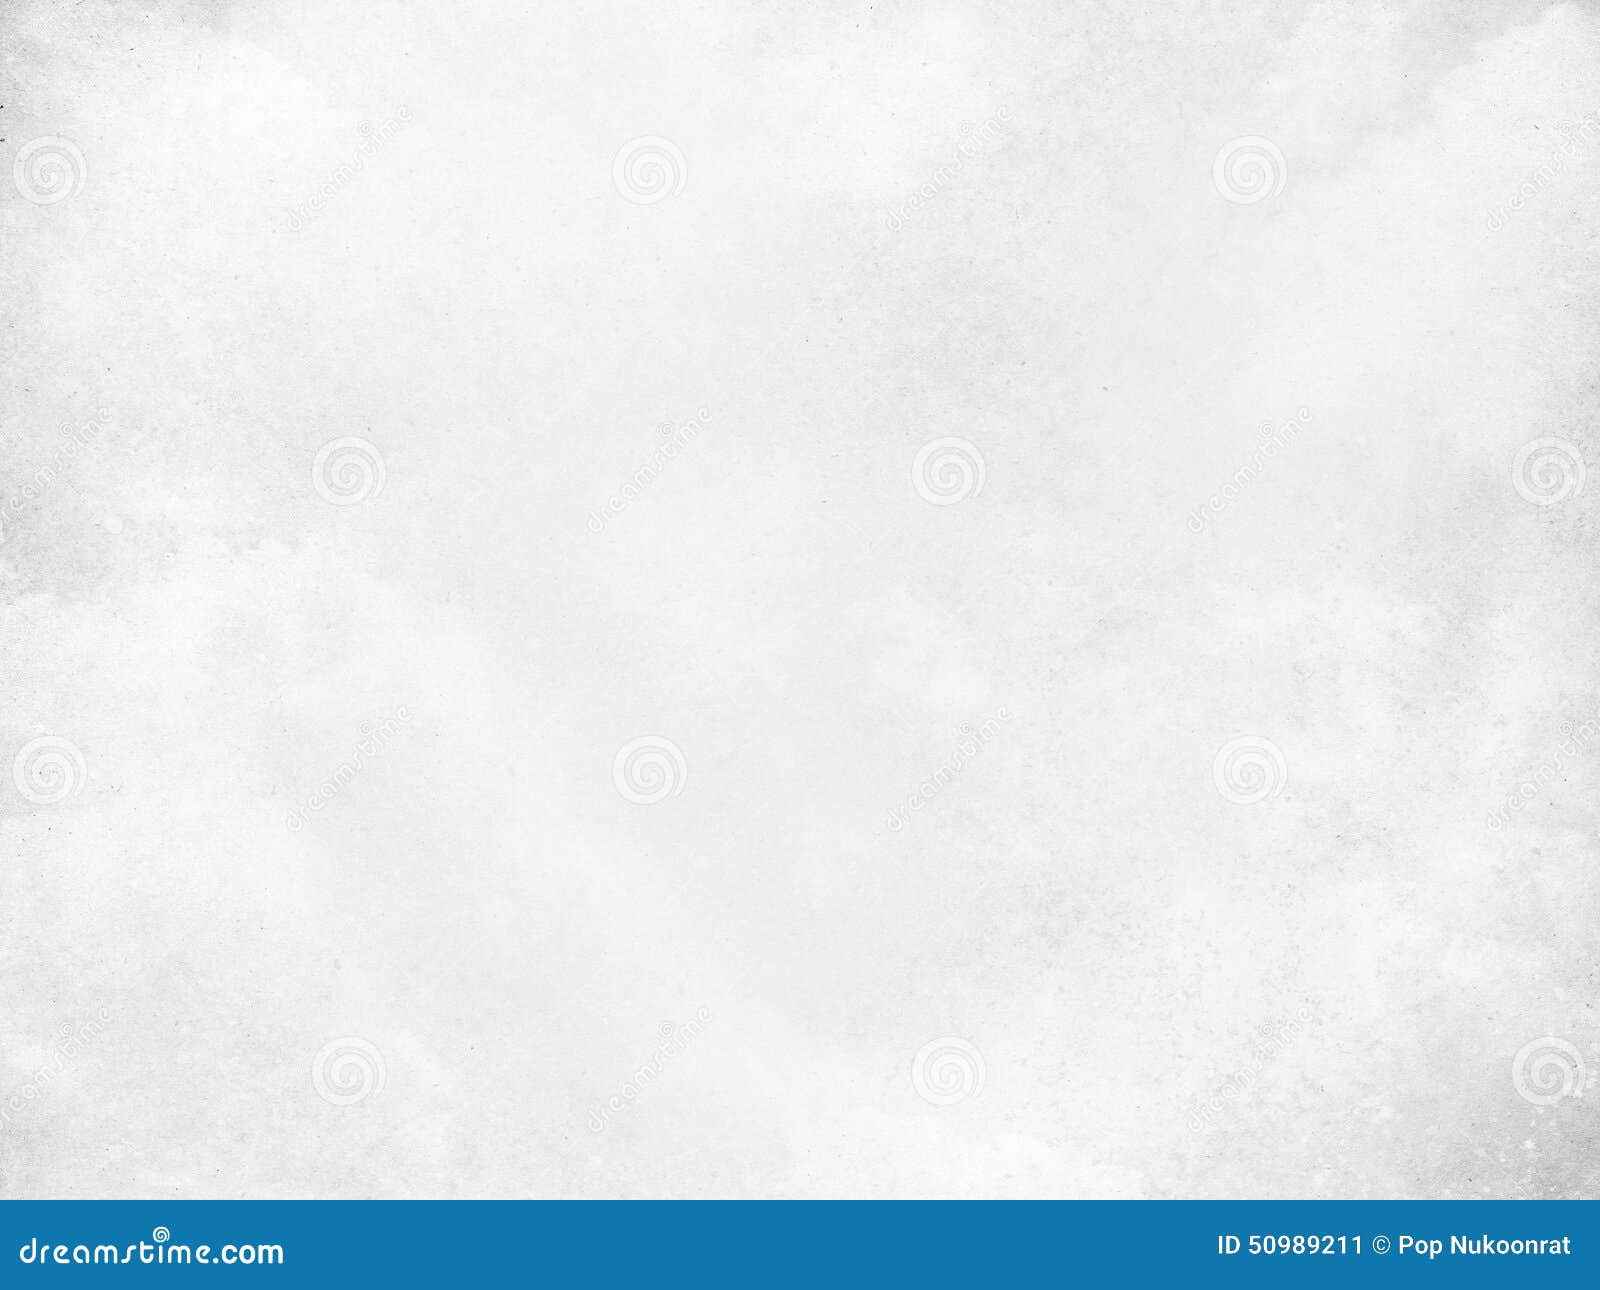 White Old Paper Grunge Texture for Background Stock Image - Image of  cardboard, letter: 50989211